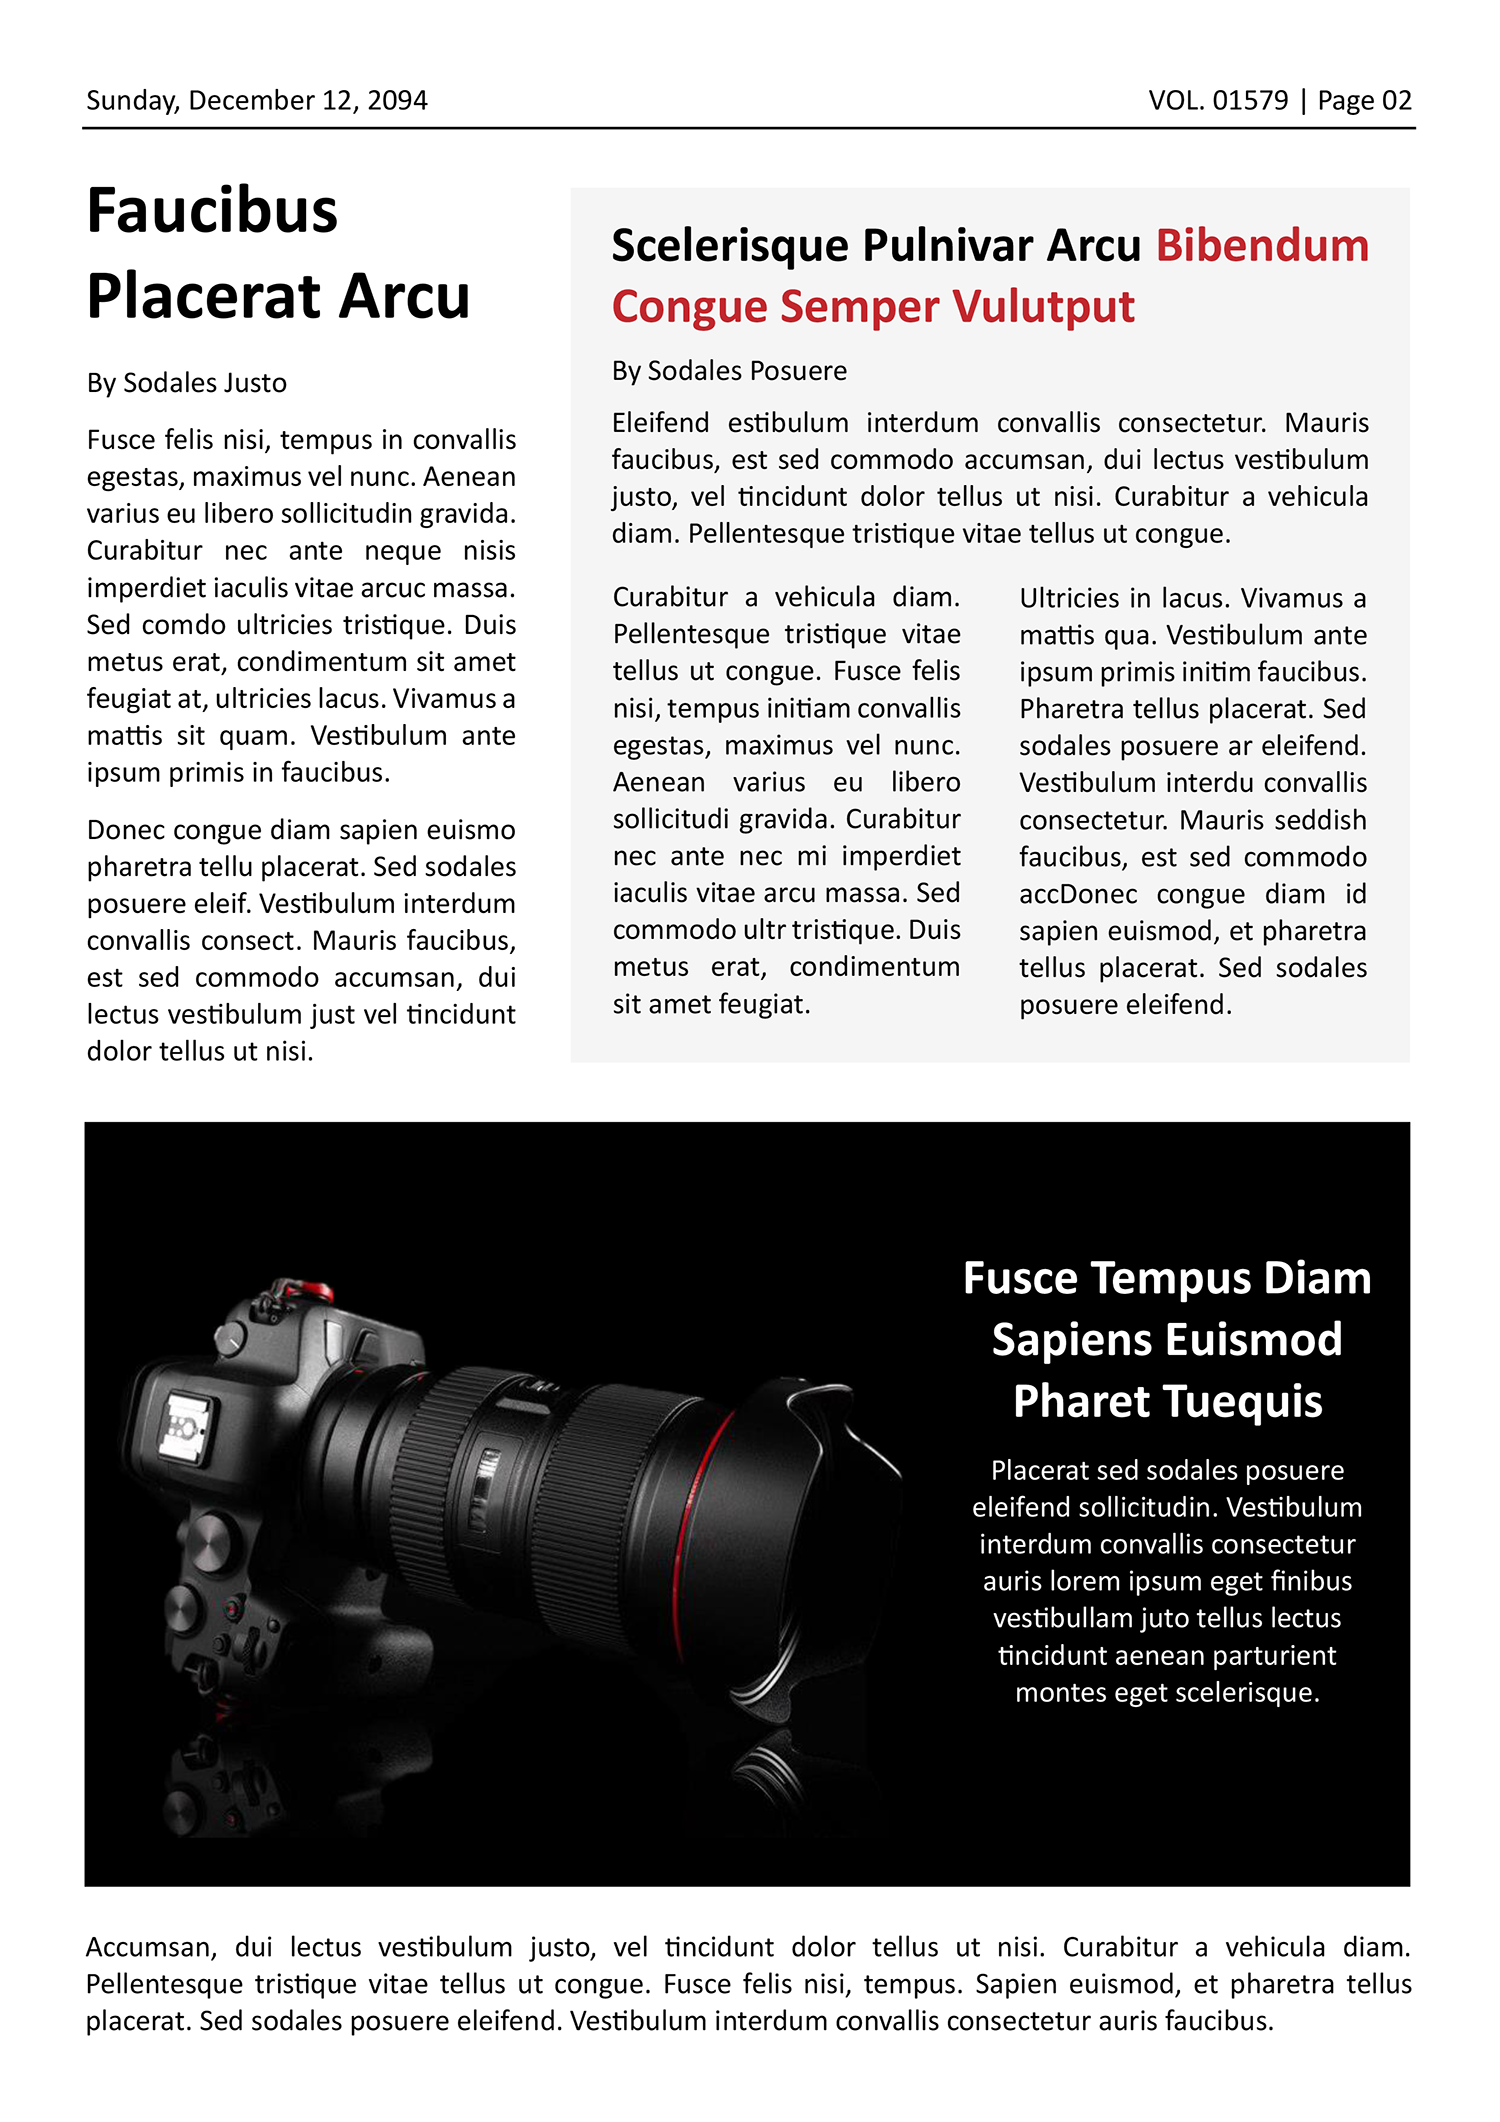 Red Newspaper Front Page Template - Page 02